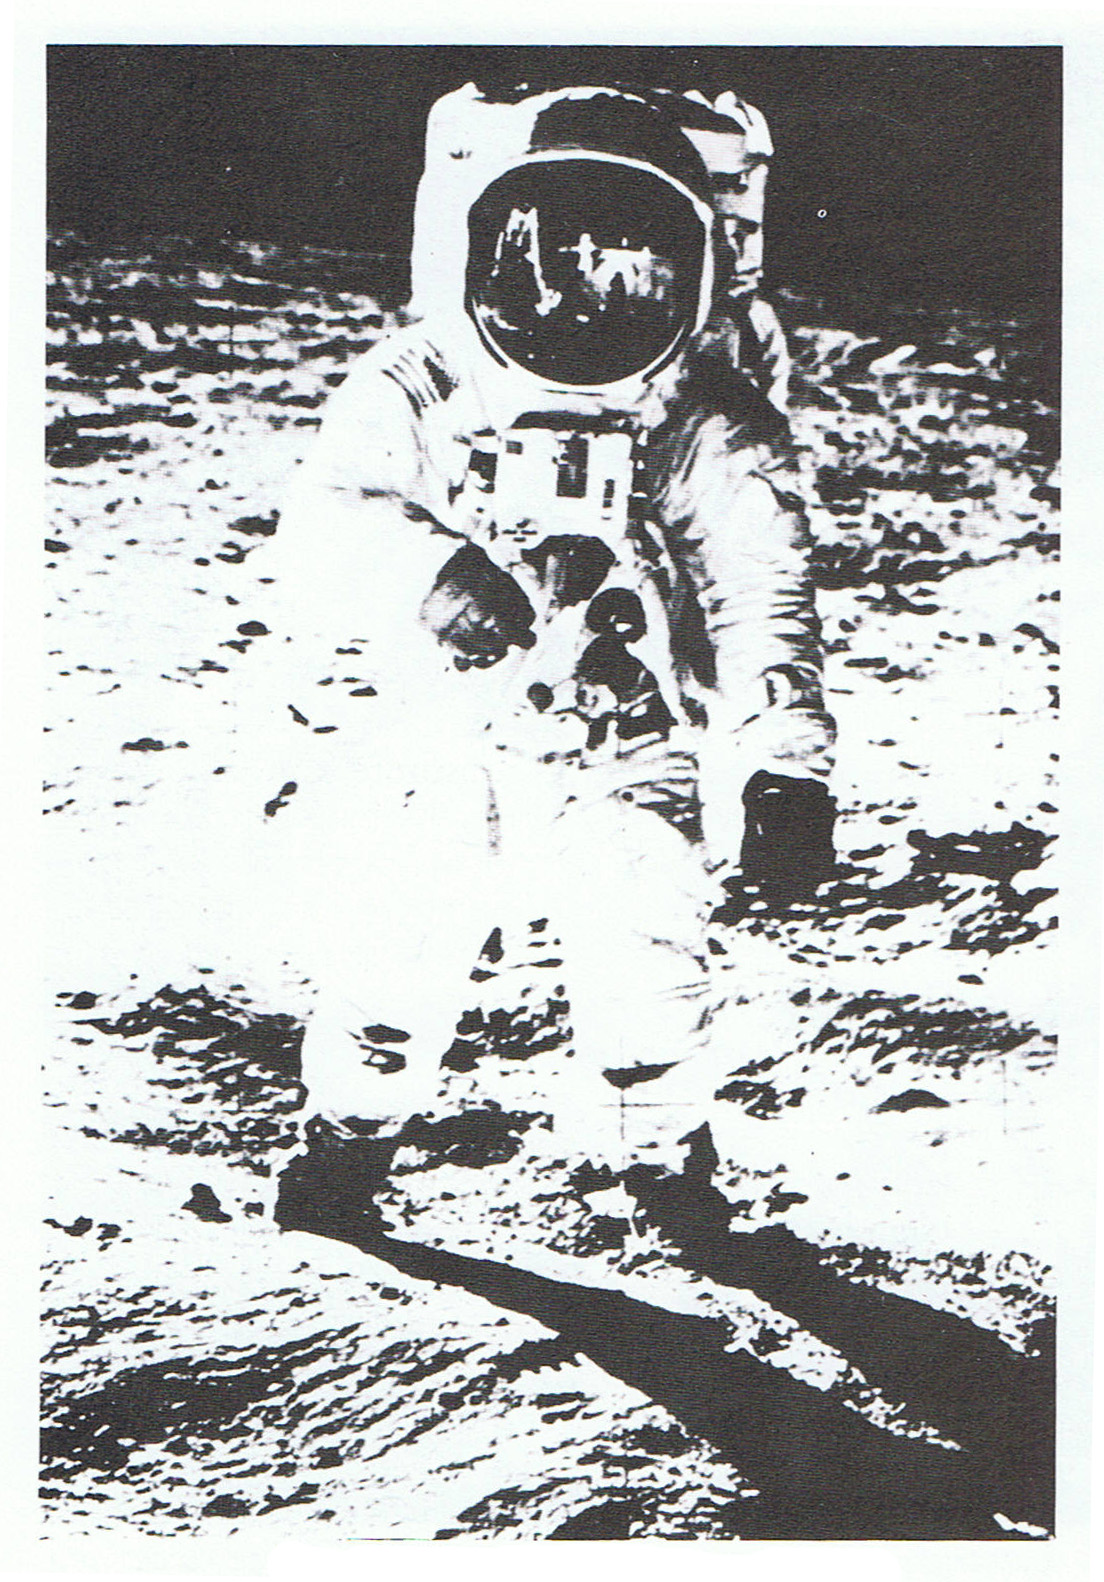 Armstrong on moon.